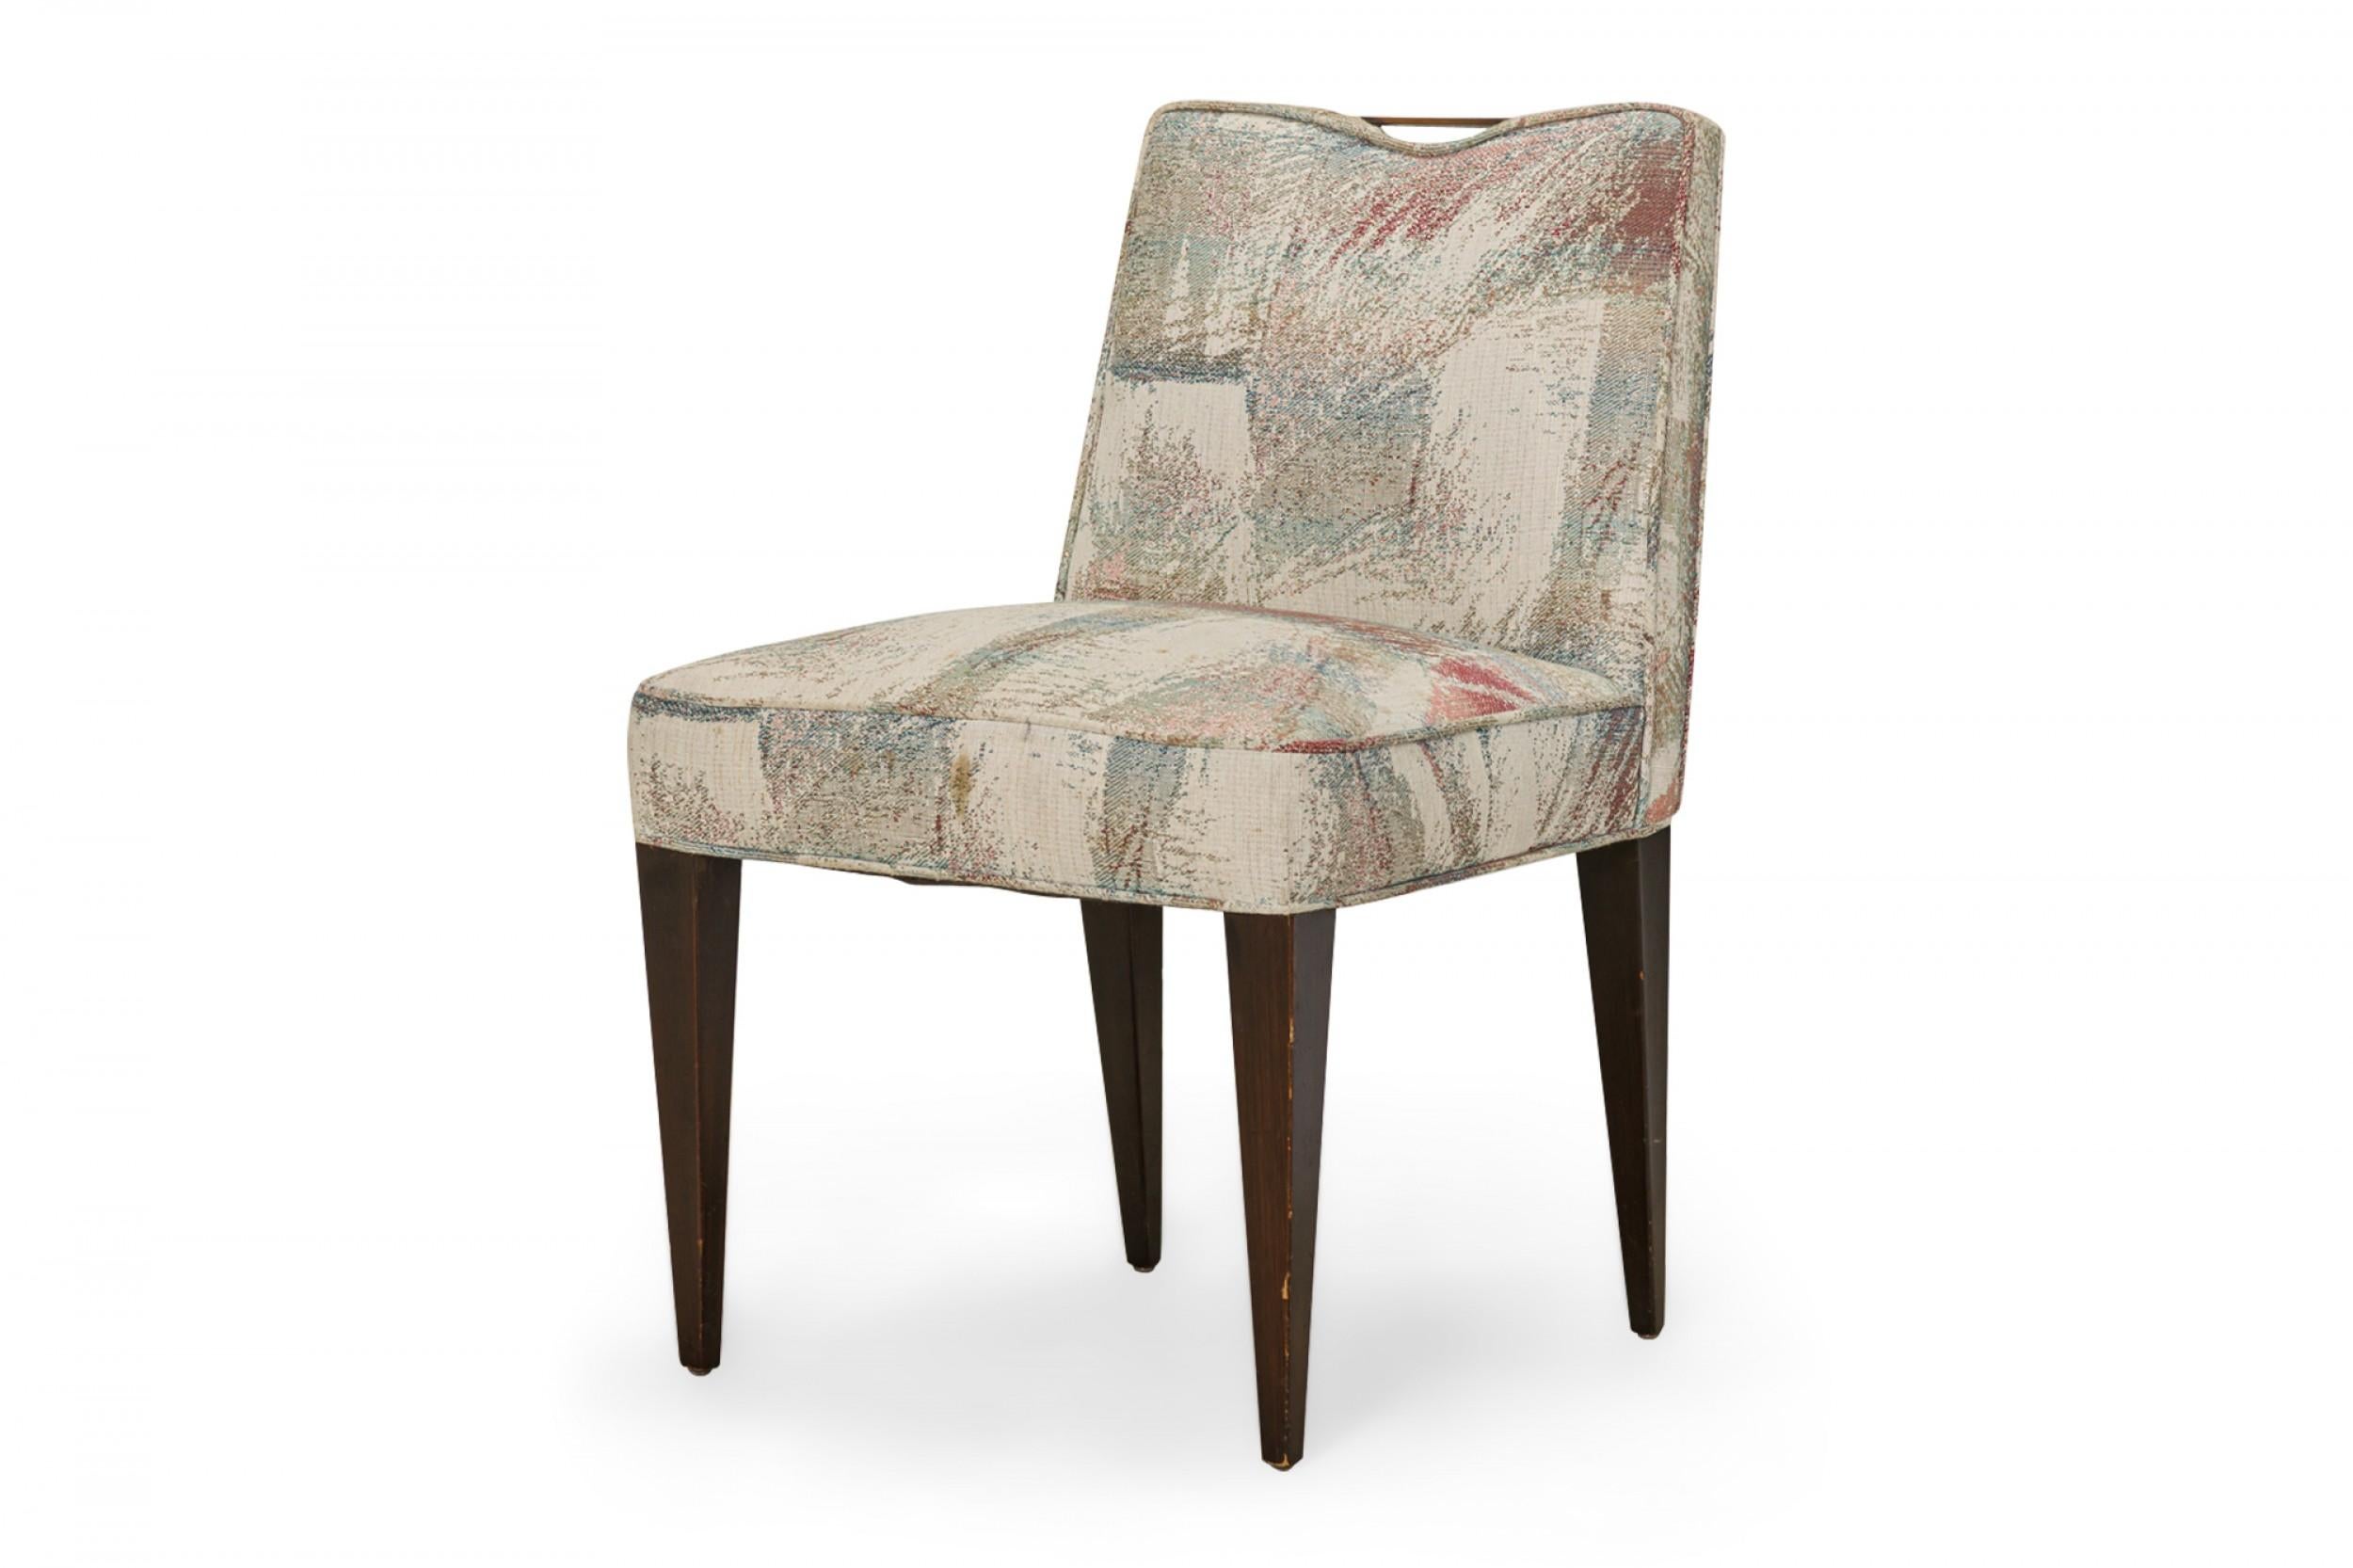 Set of 6 Edward Wormley for Dunbar Patterned Pastel Upholstered Dining Chairs In Good Condition For Sale In New York, NY